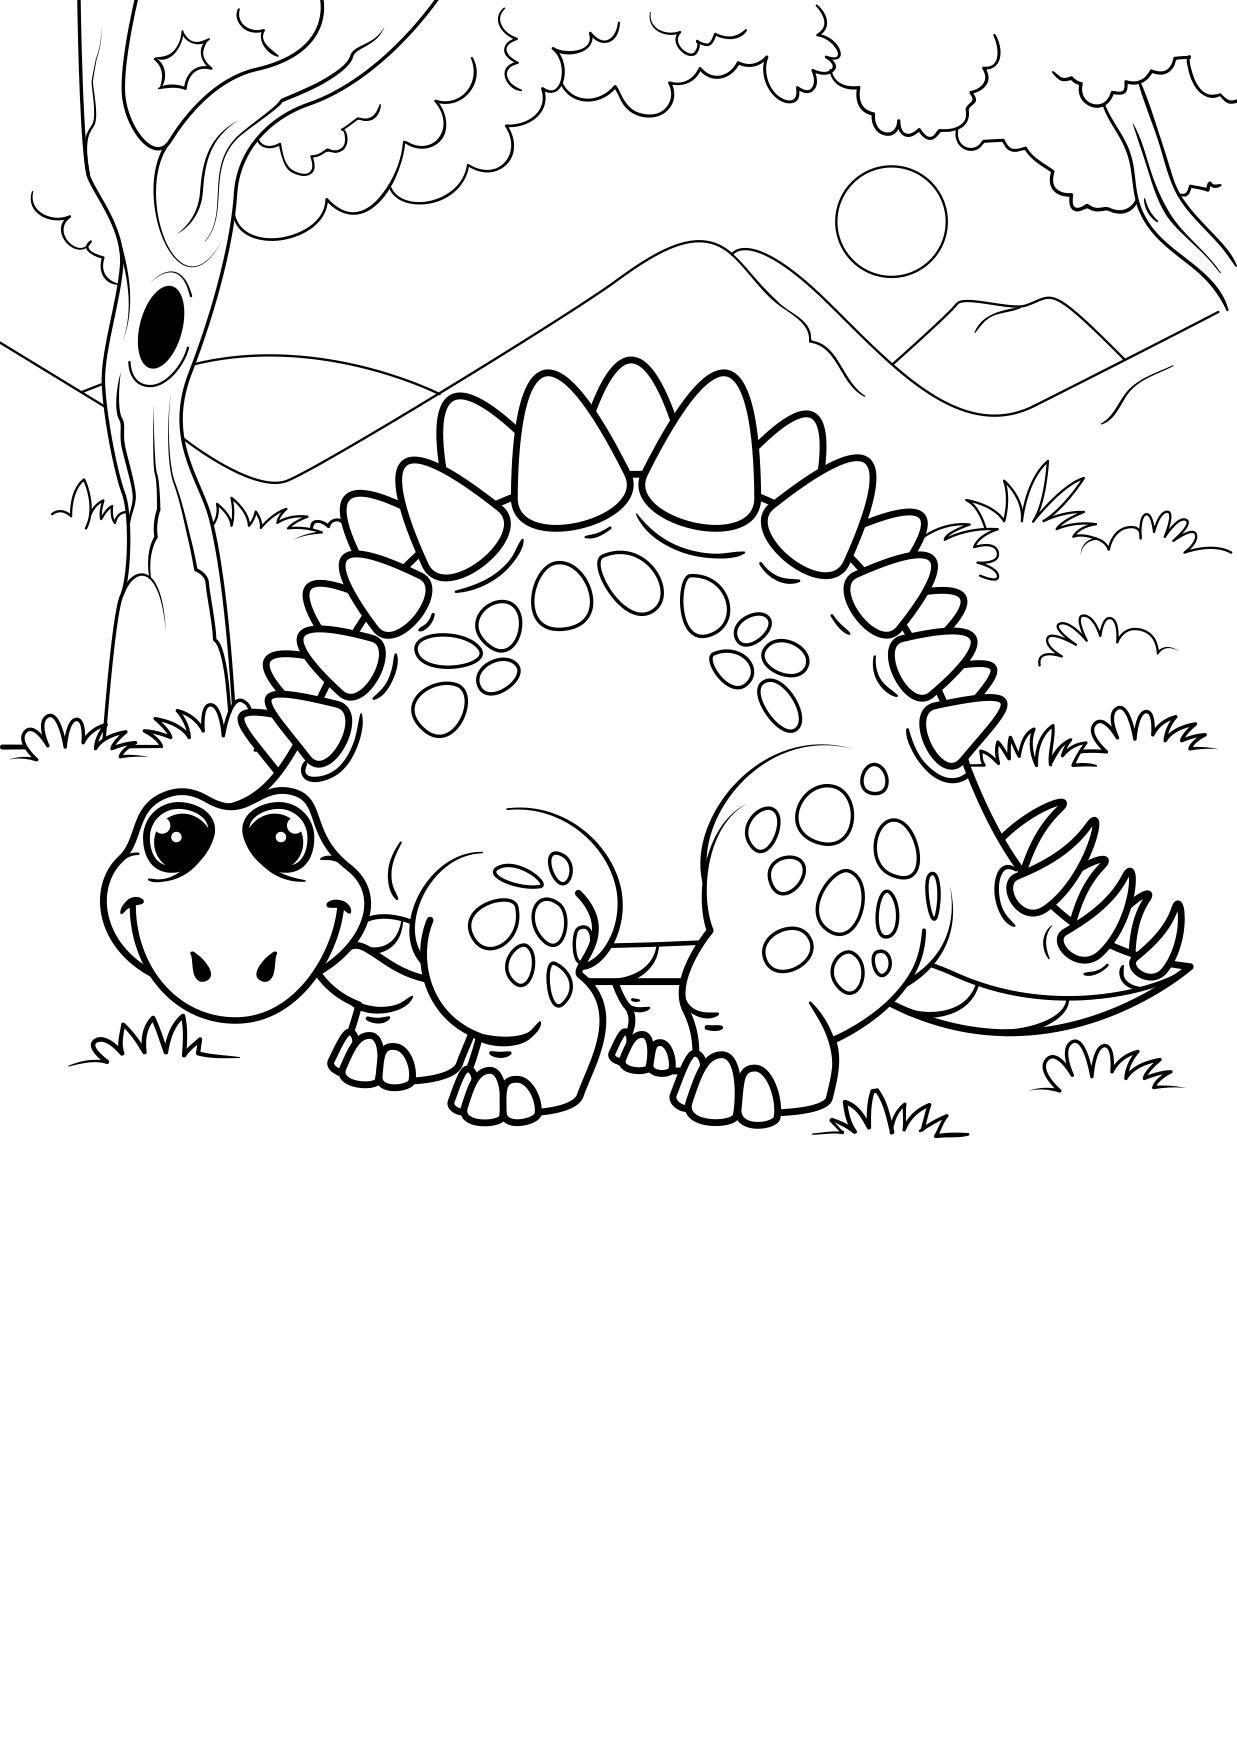 Coloring page dinosaur in the forest